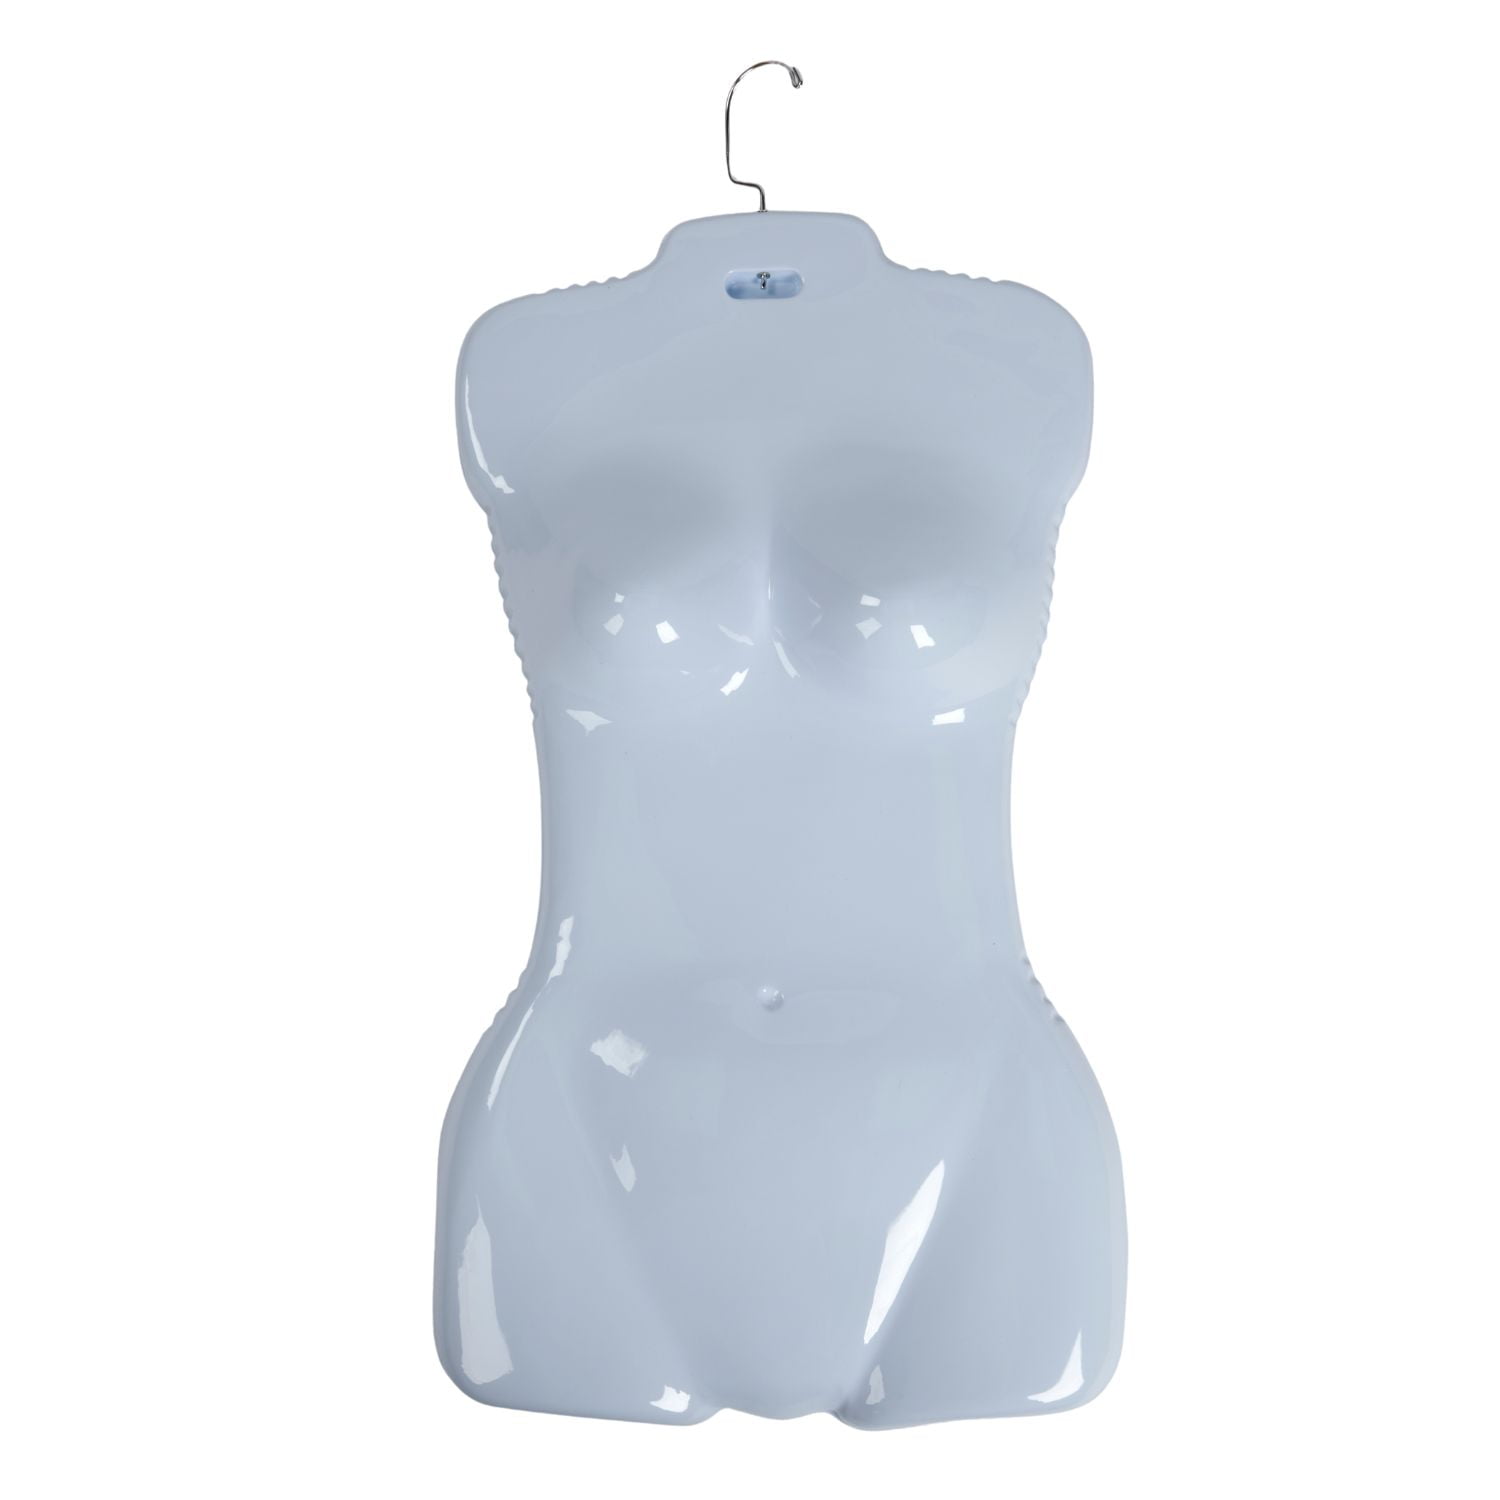 Female Molded Shatterproof Black Plastic Shapely Torso Form with Hook -  Fits Women's Sizes 5-10 - Hanging Fashion Form Mannequin to Display Top and